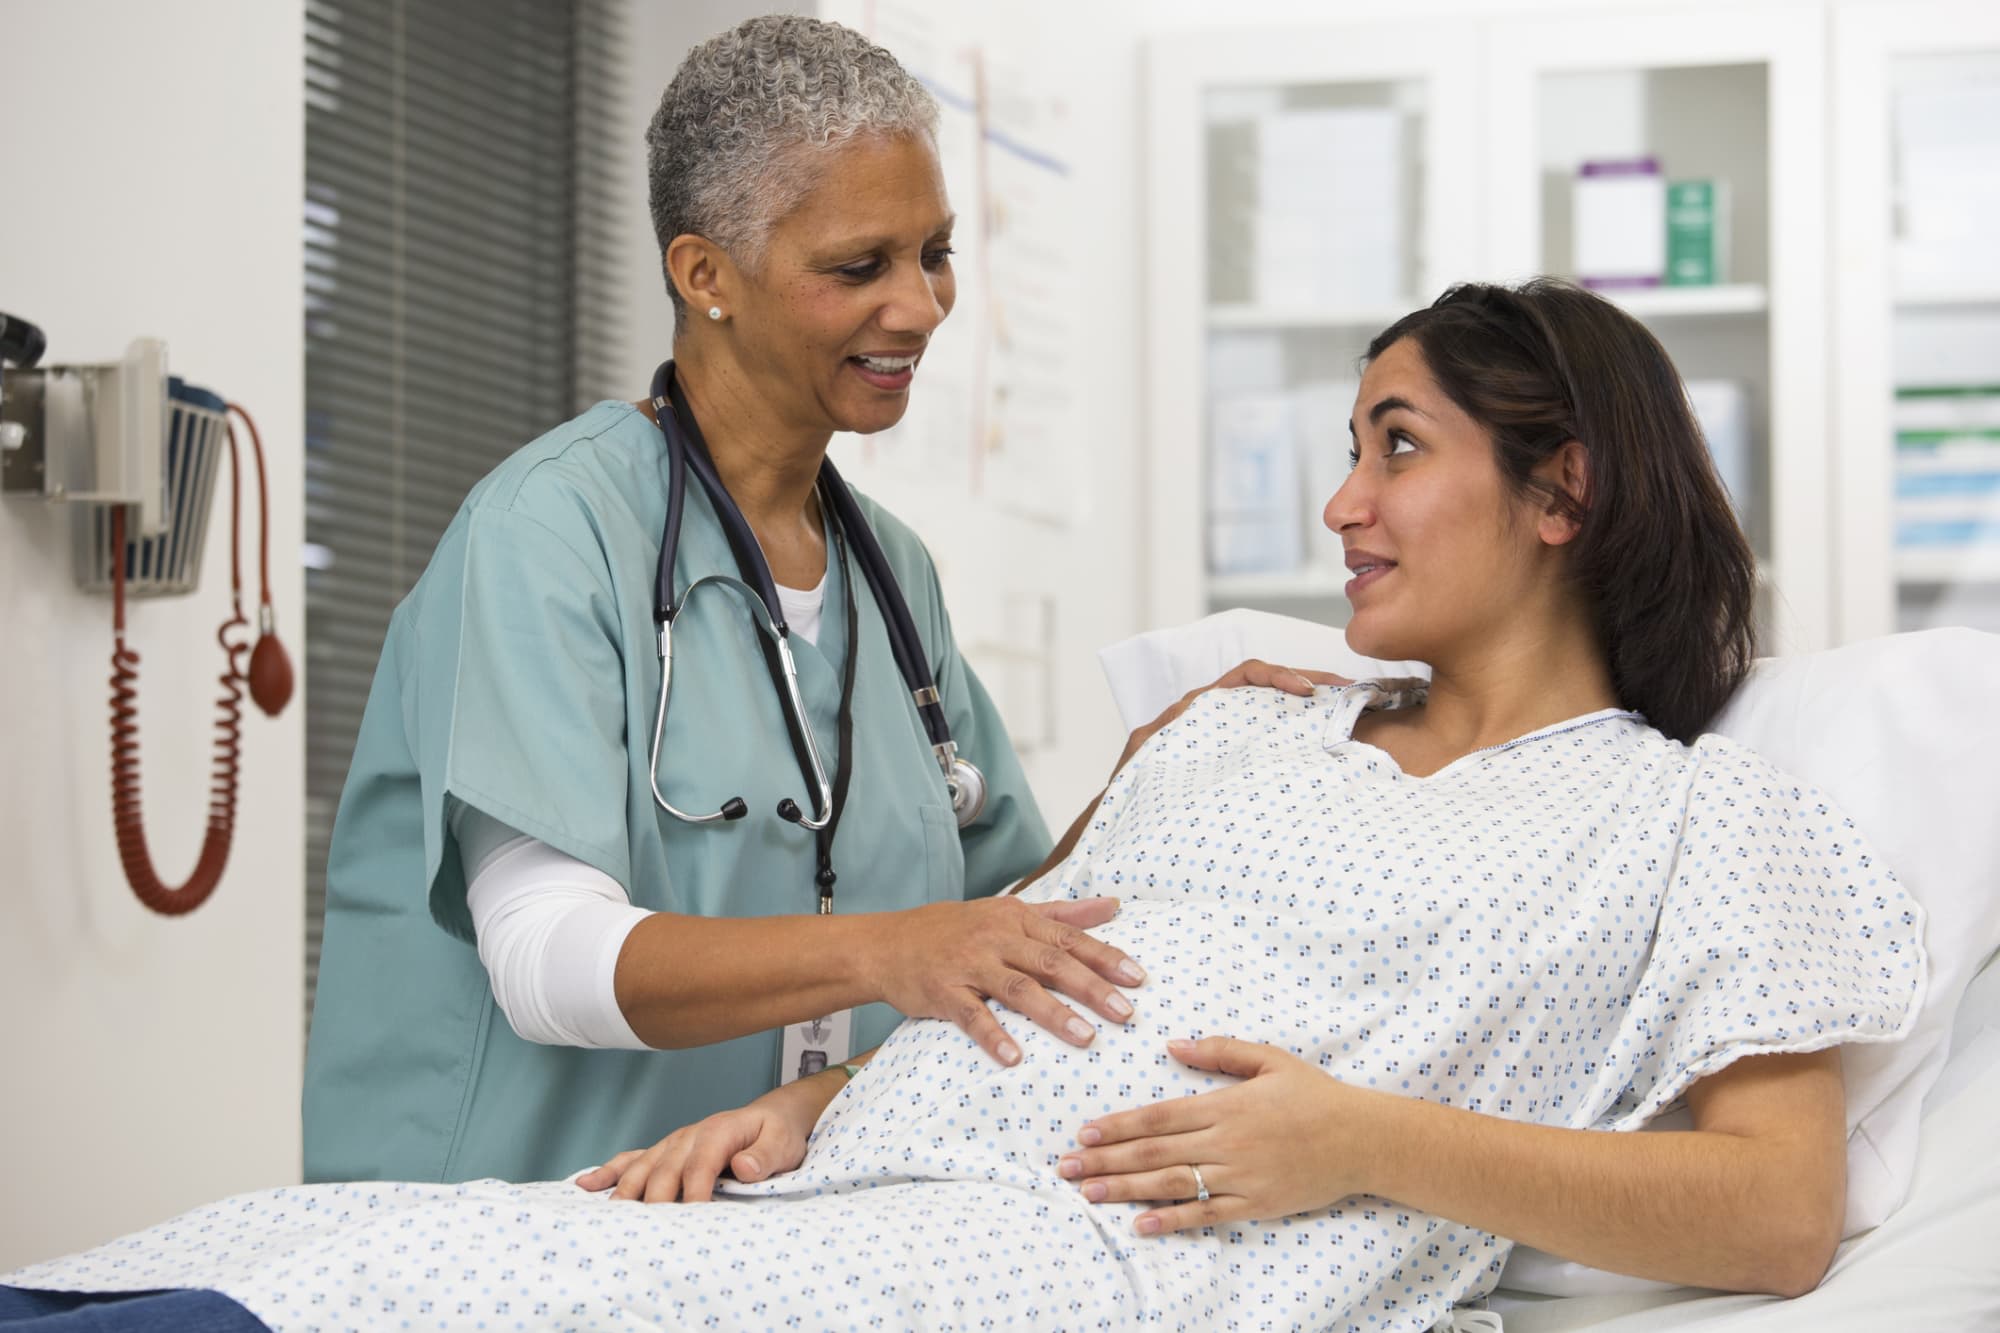 What Is A Labor And Delivery Nurse Practitioner? (Answered By A Nurse)